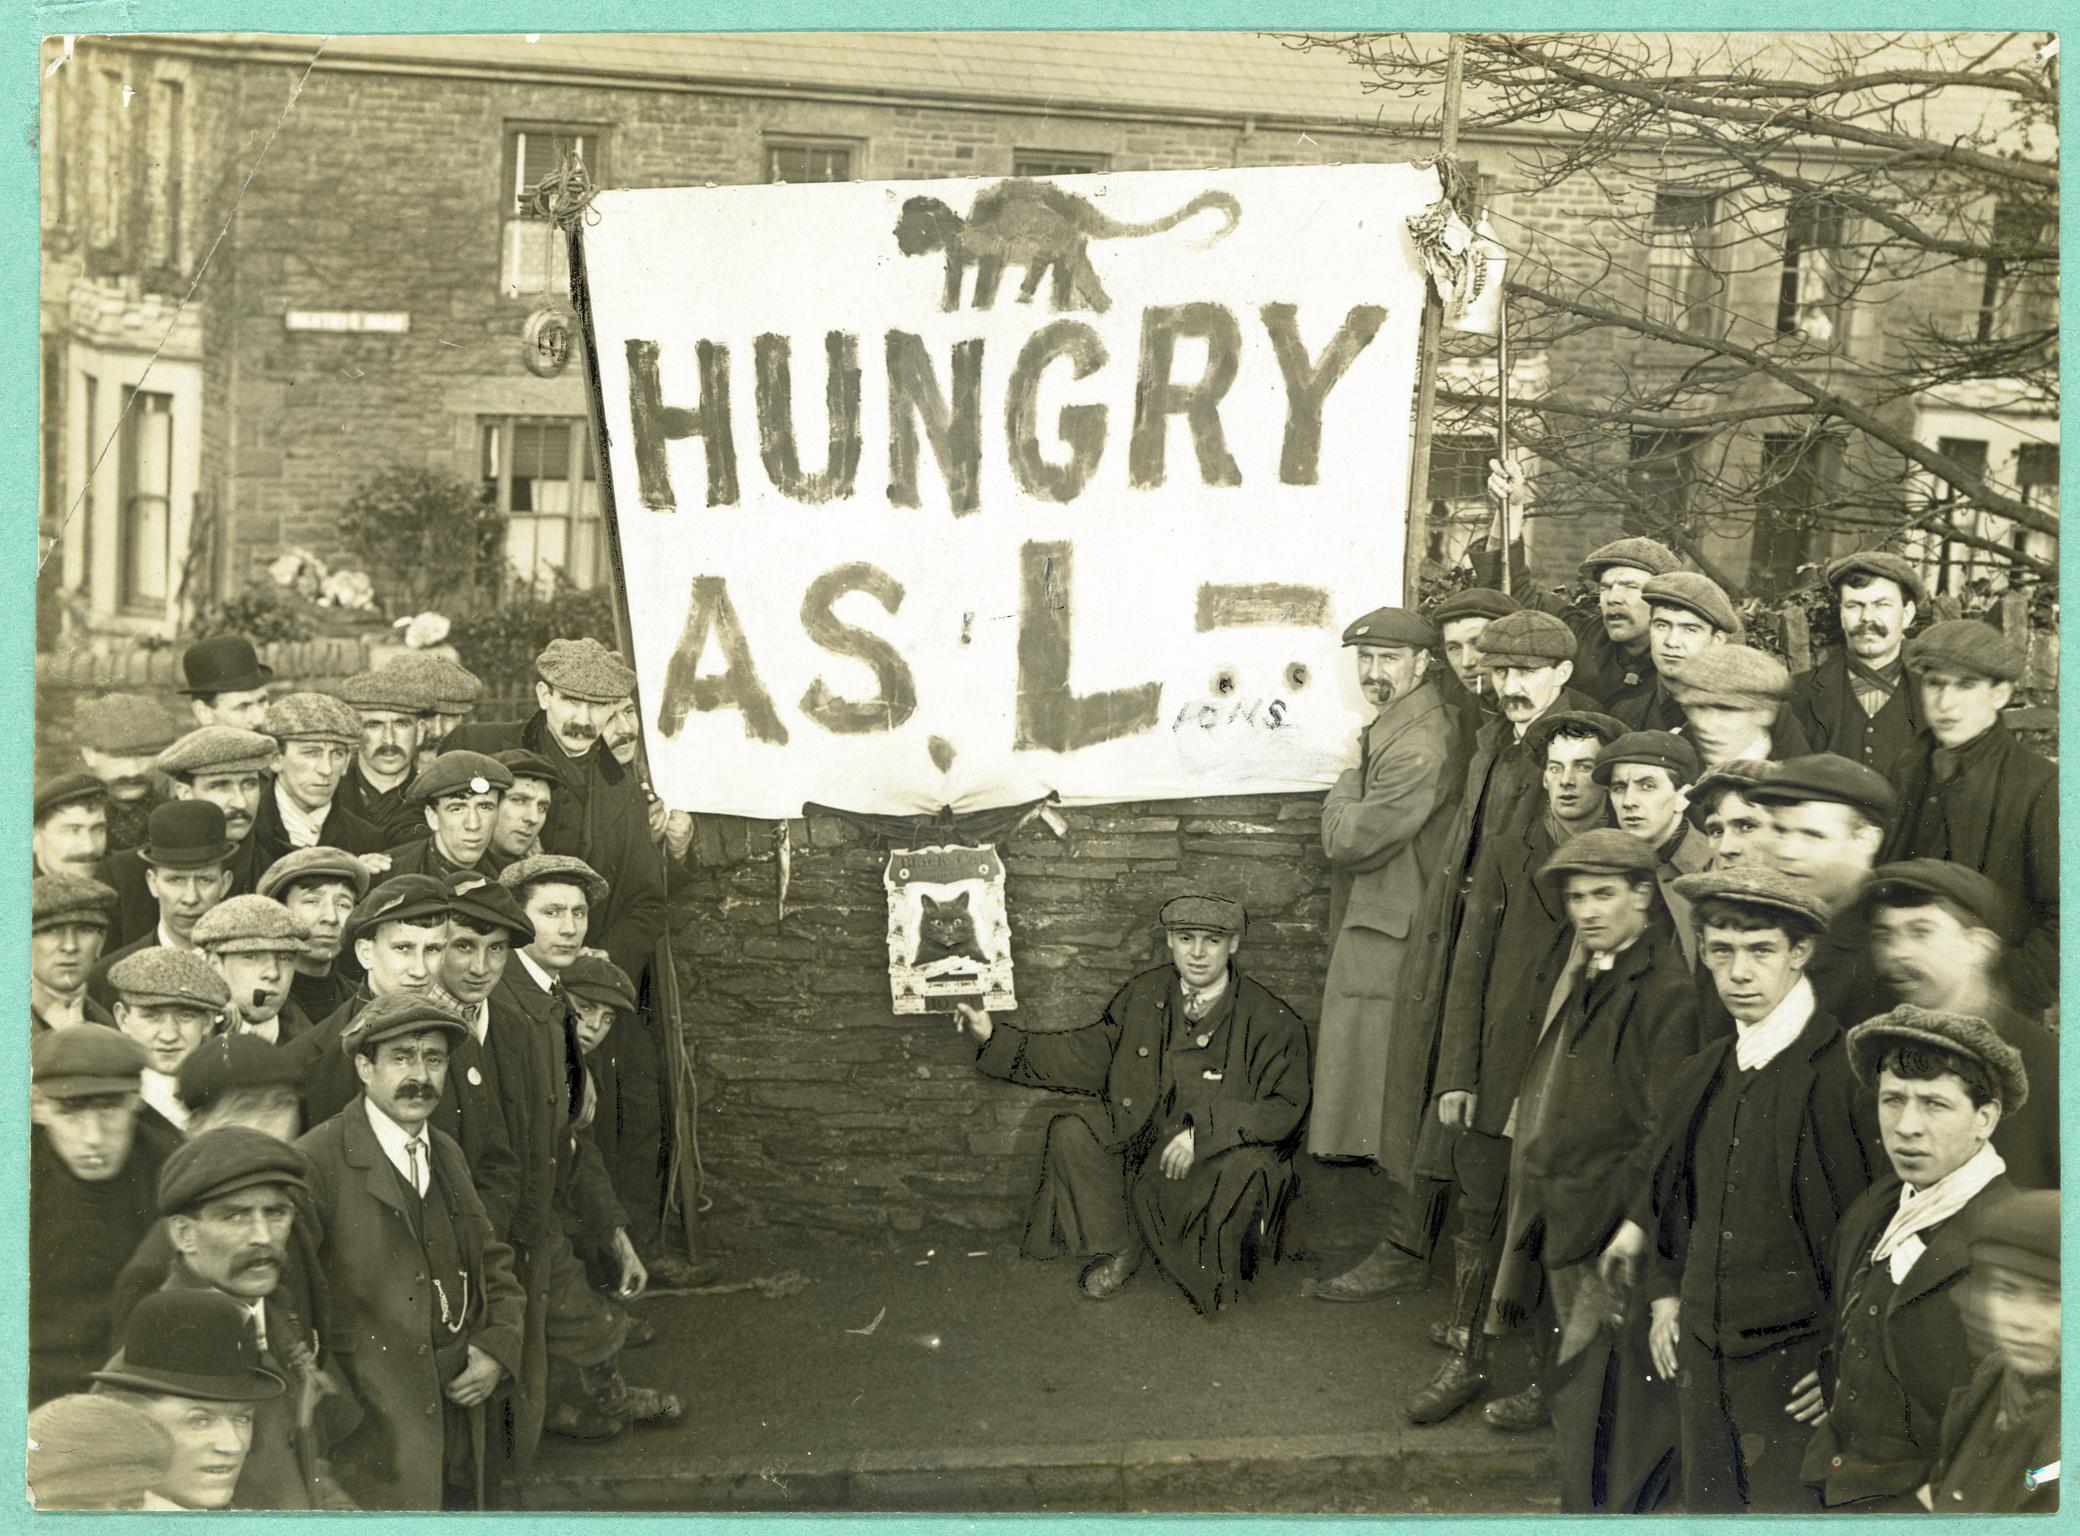 Mine-workers protest, photograph